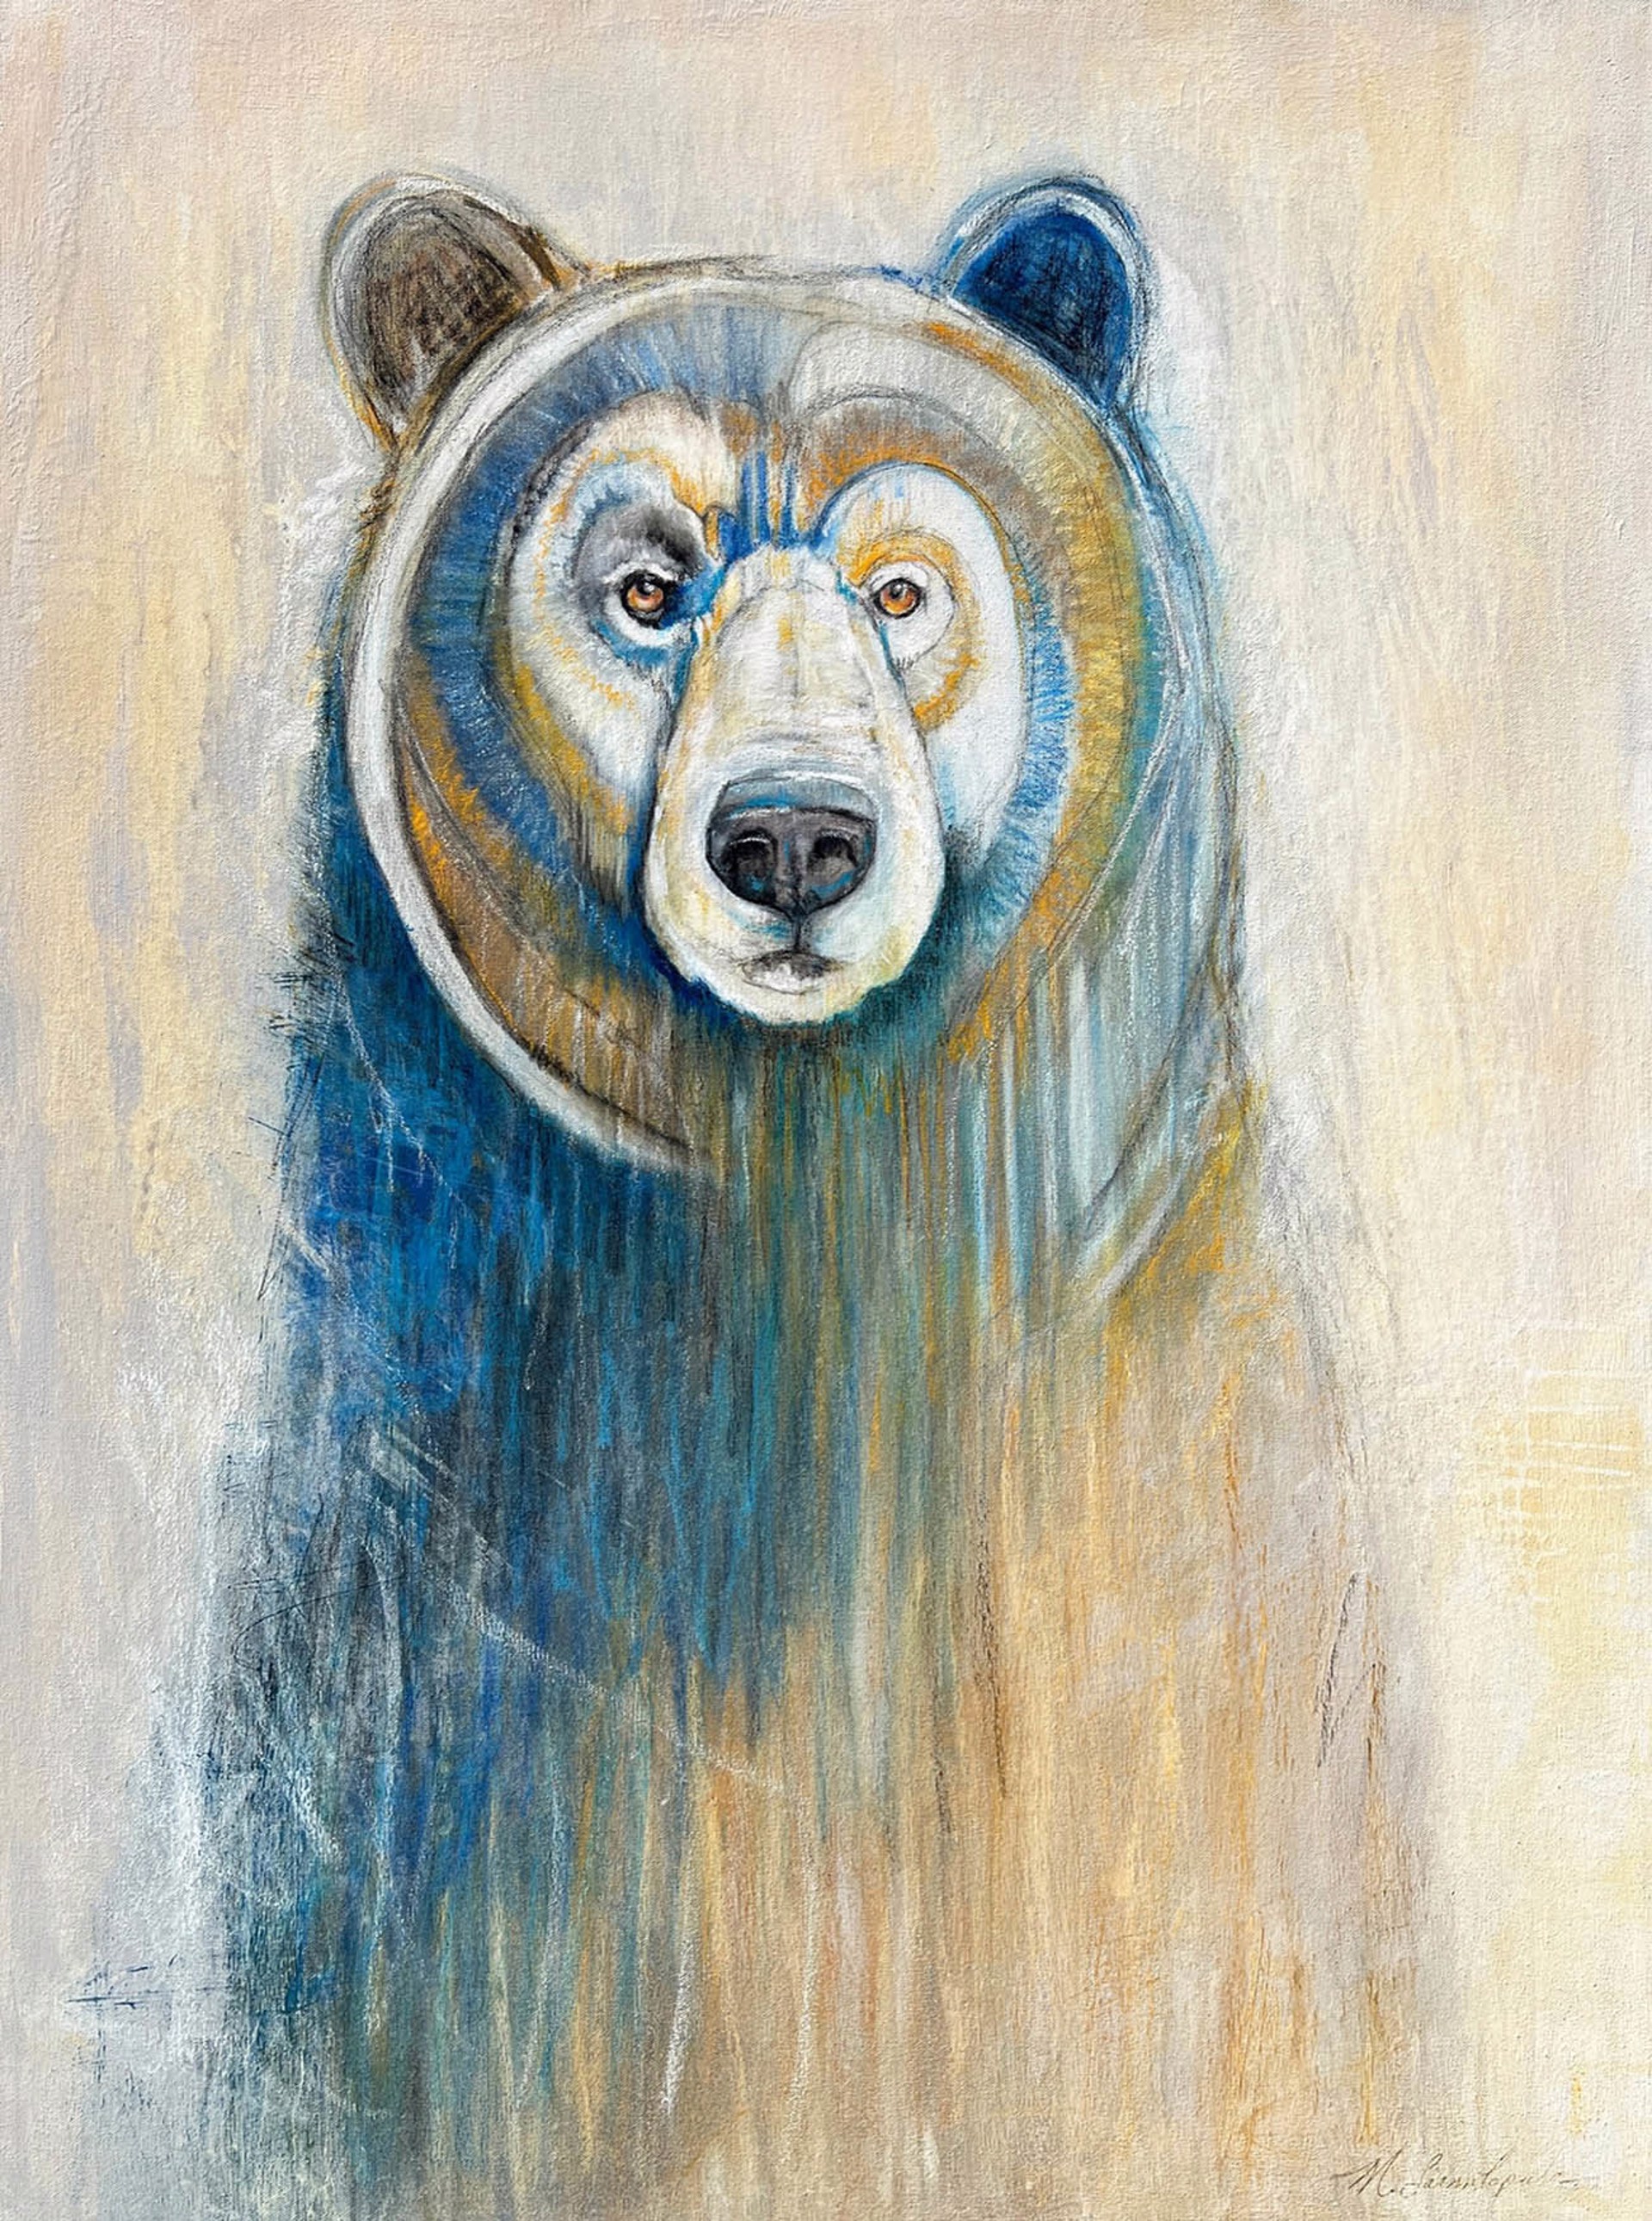 Original Mixed Media Artwork Featuring Grizzly Bear Portrait In Blues And Yellows 